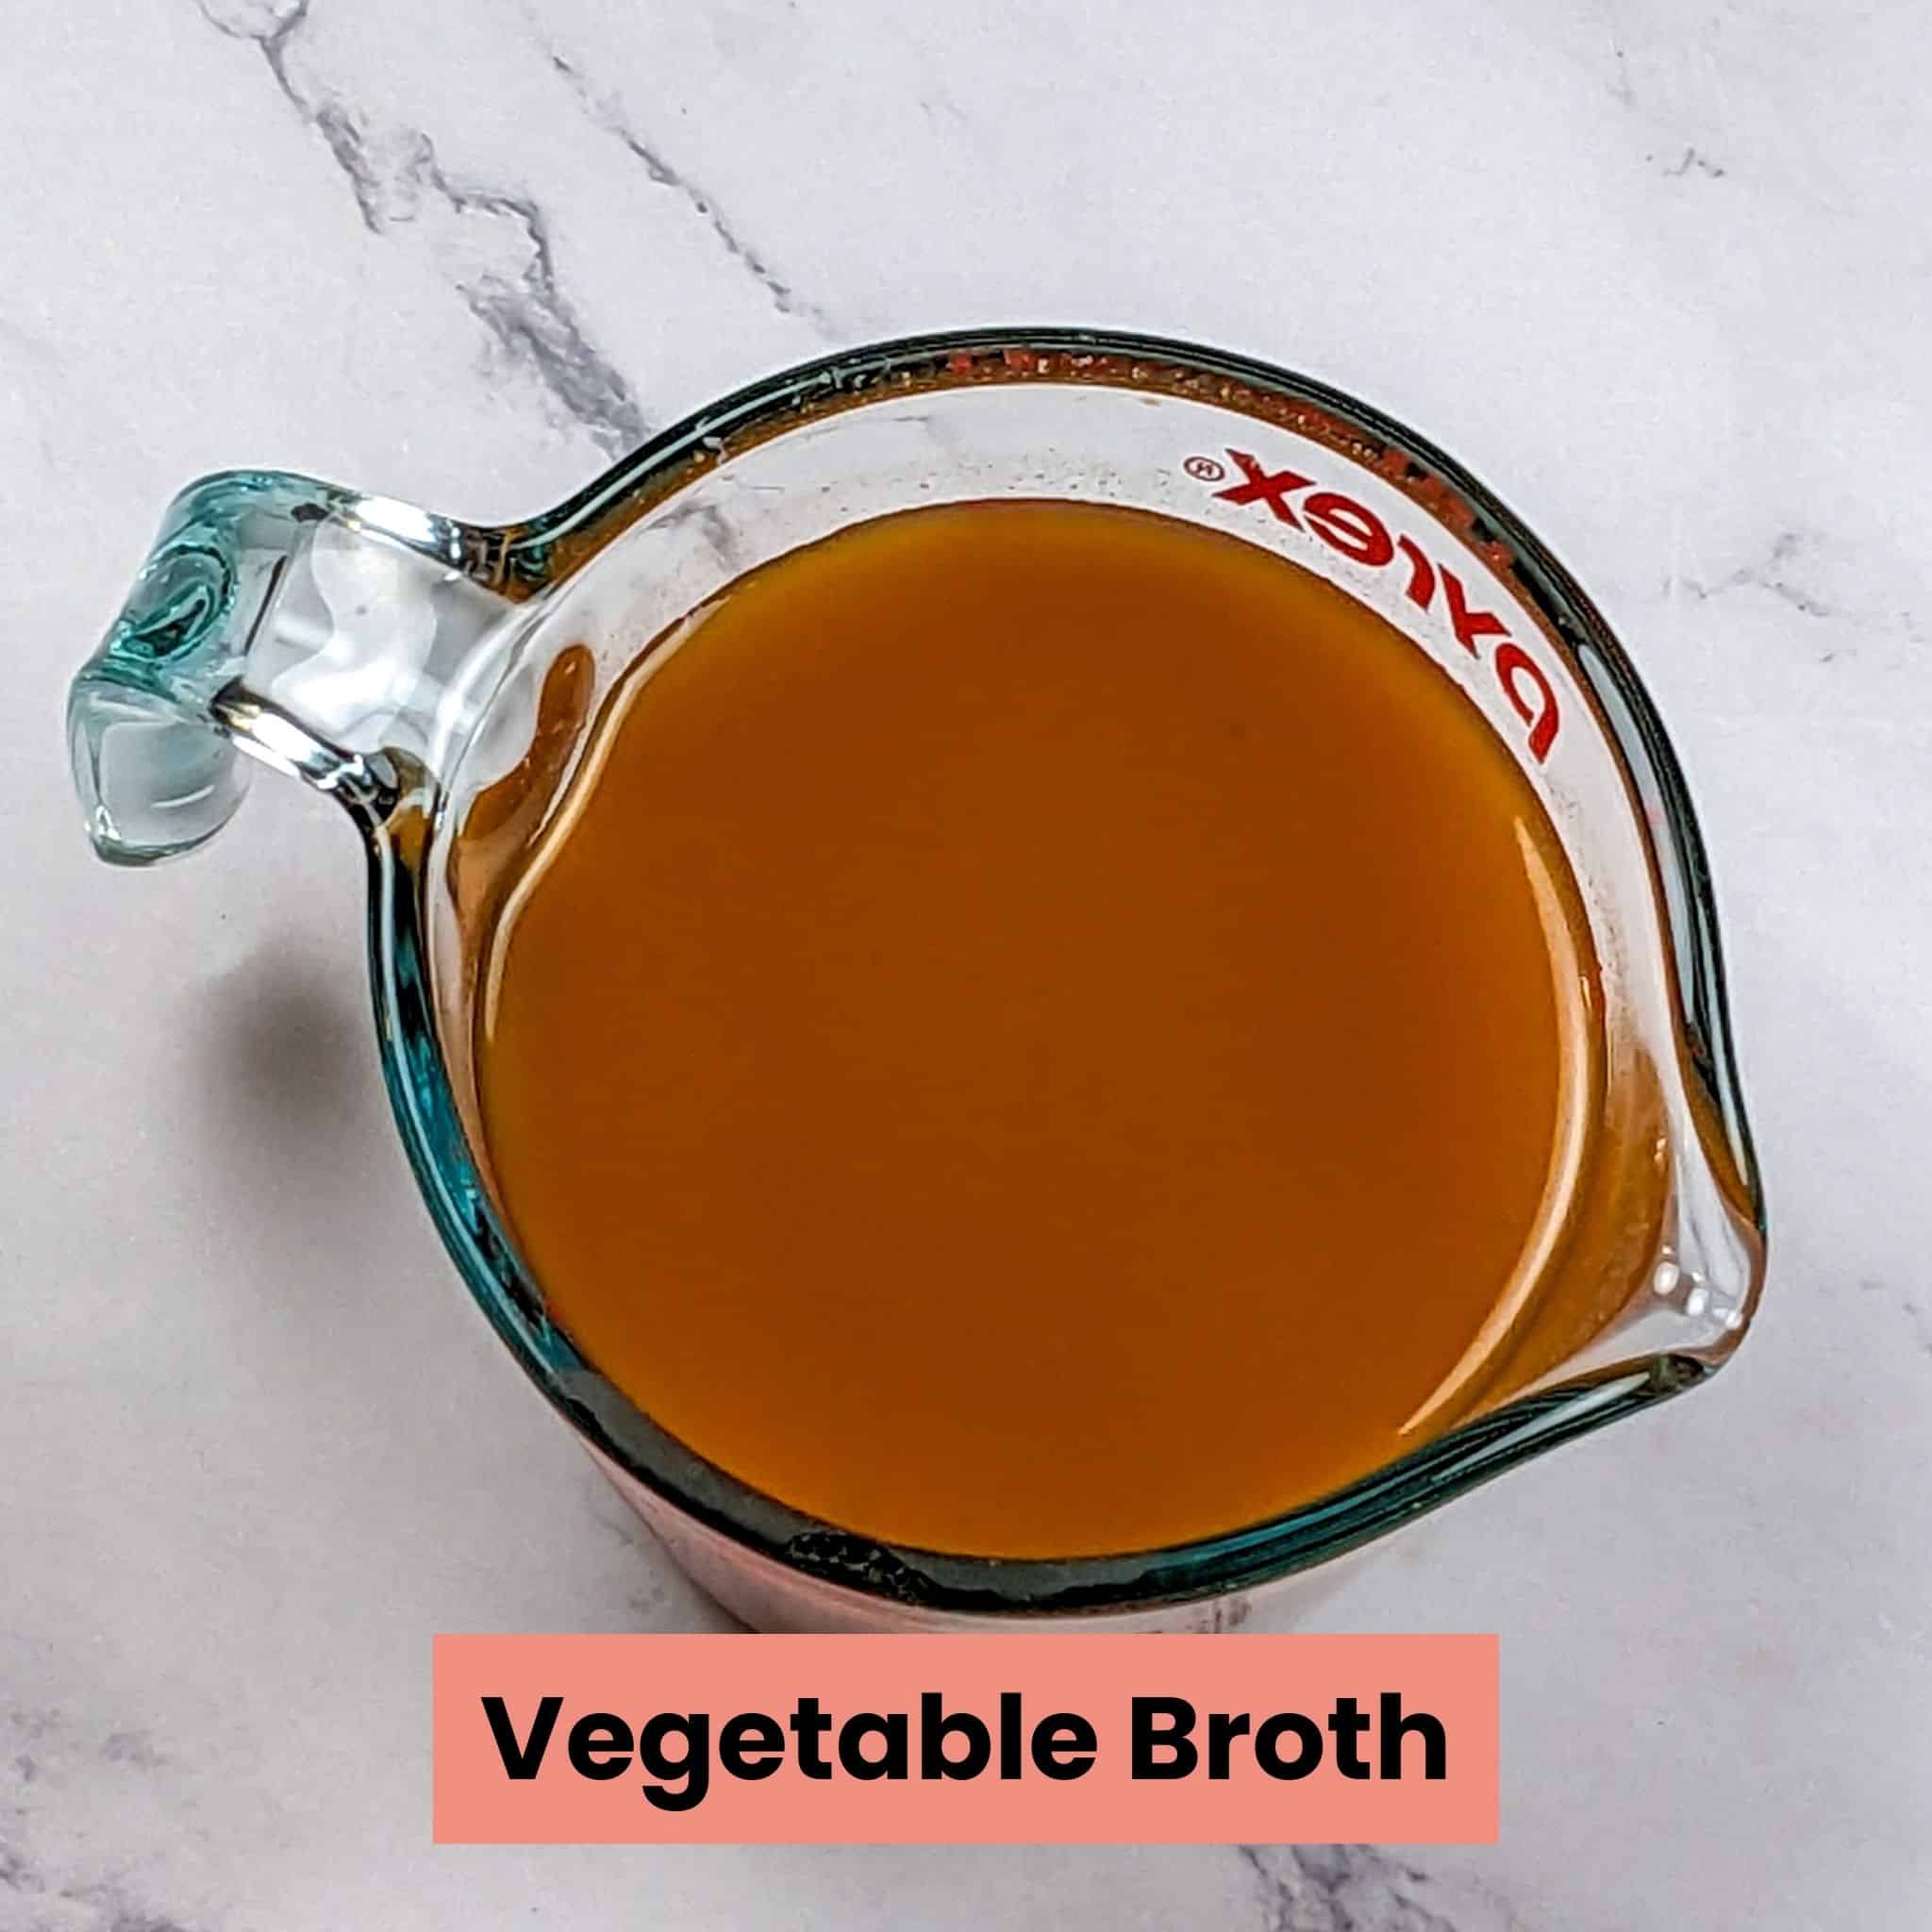 low-sodium vegetable broth in a pyrex glass measuring cup for the bean kale tomato stew